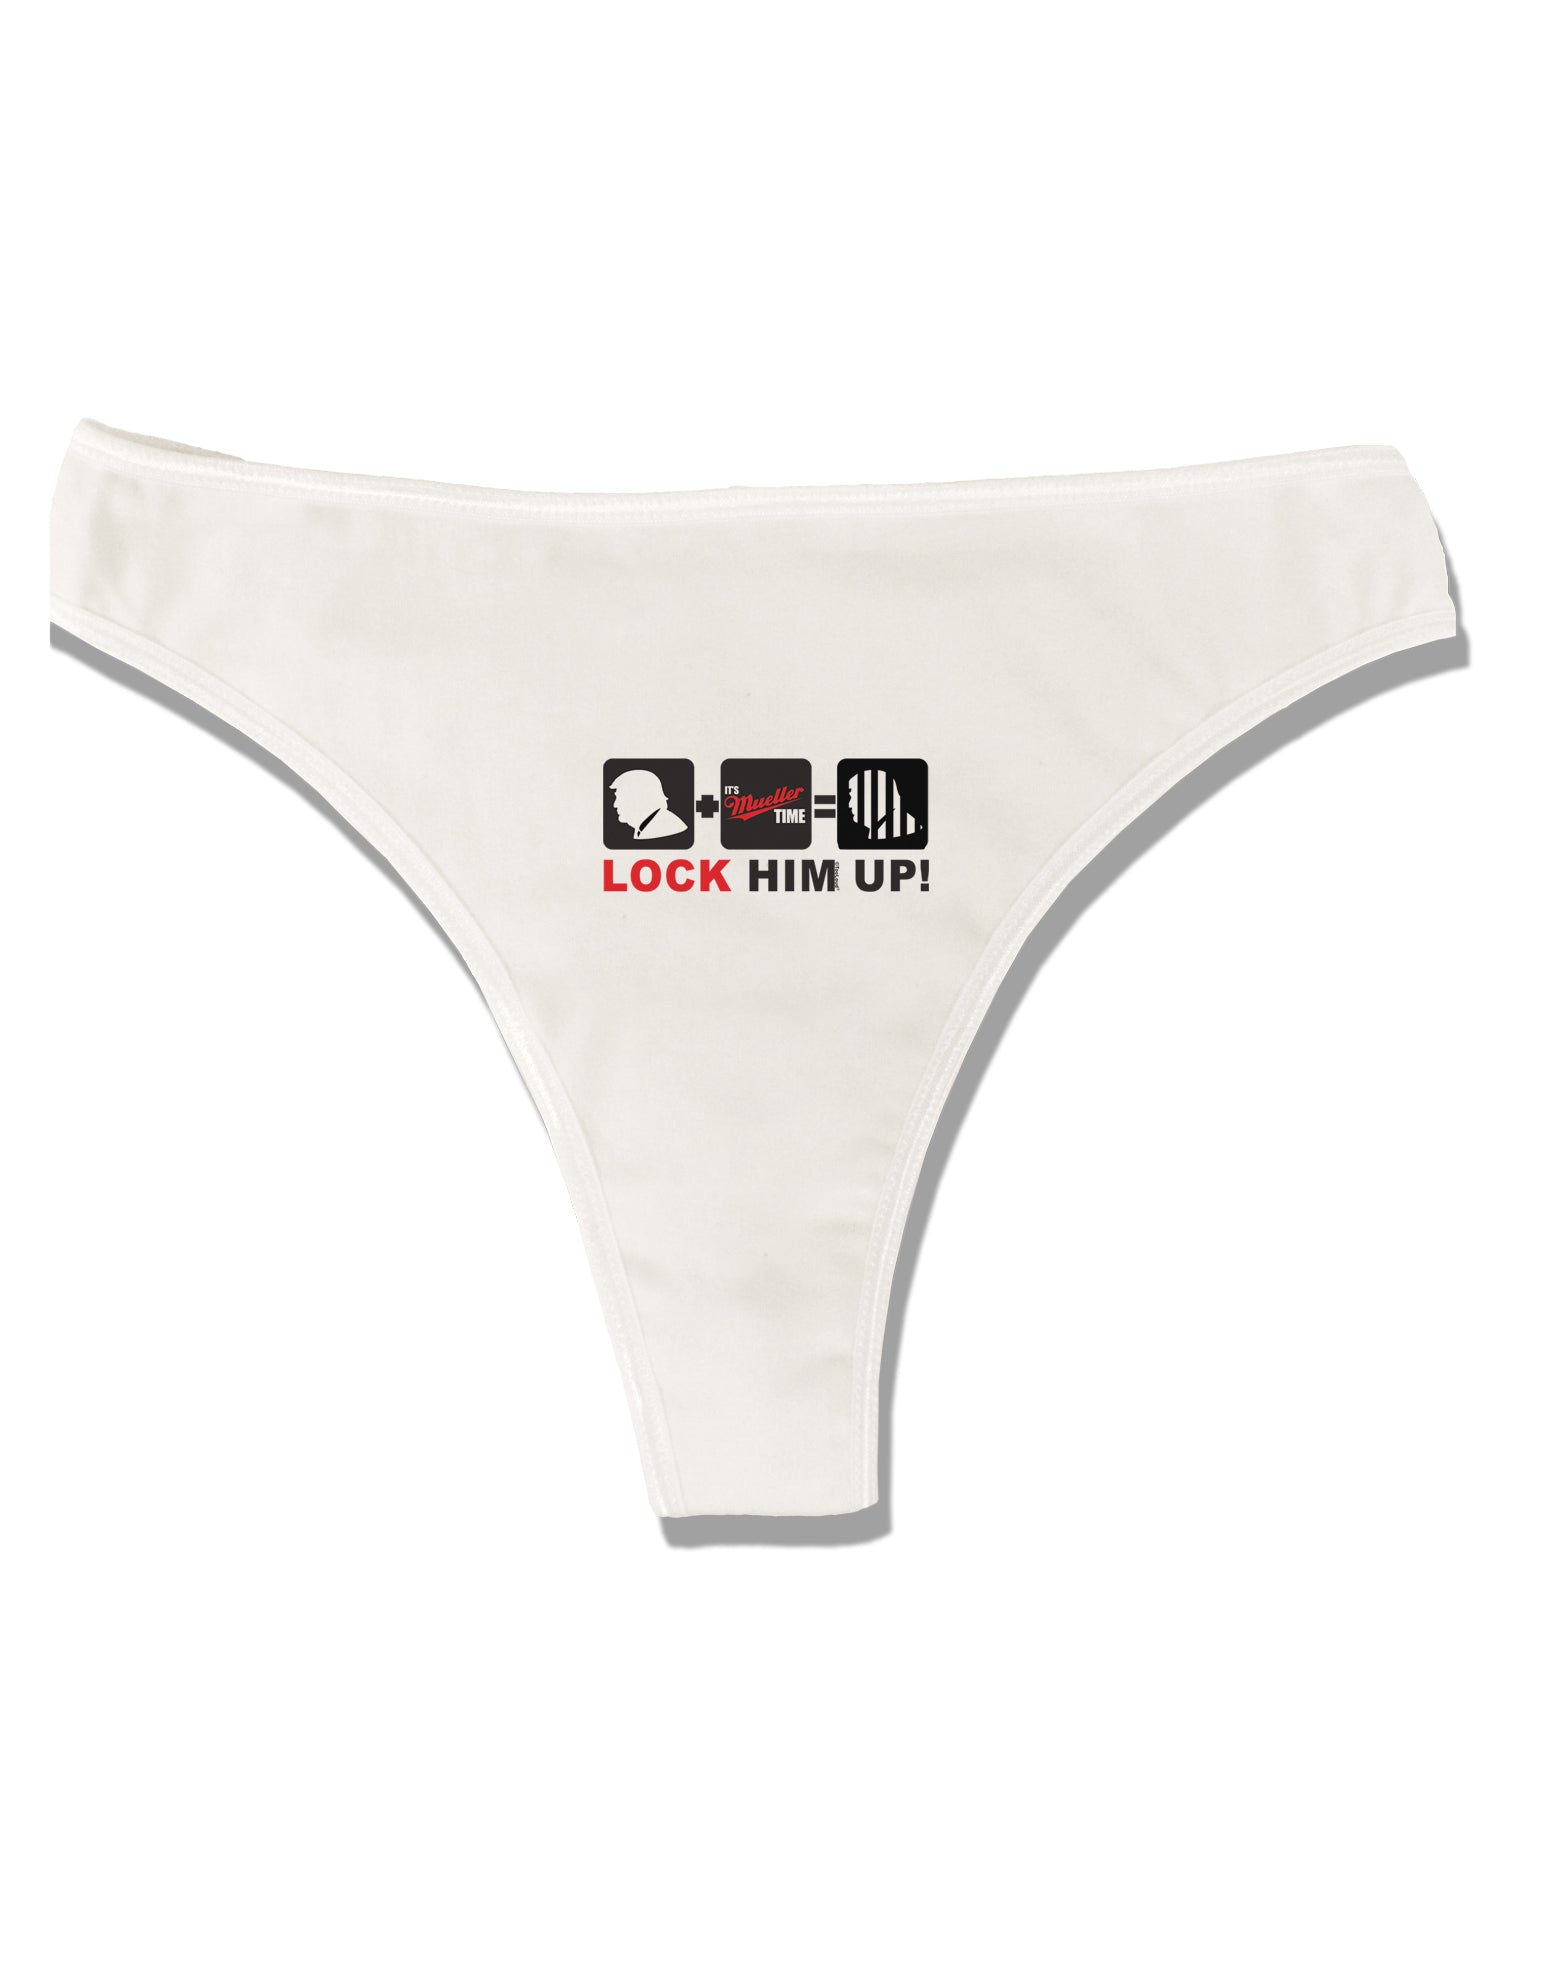 Lock Him Up Anti-Trump Funny Womens Thong Underwear by TooLoud